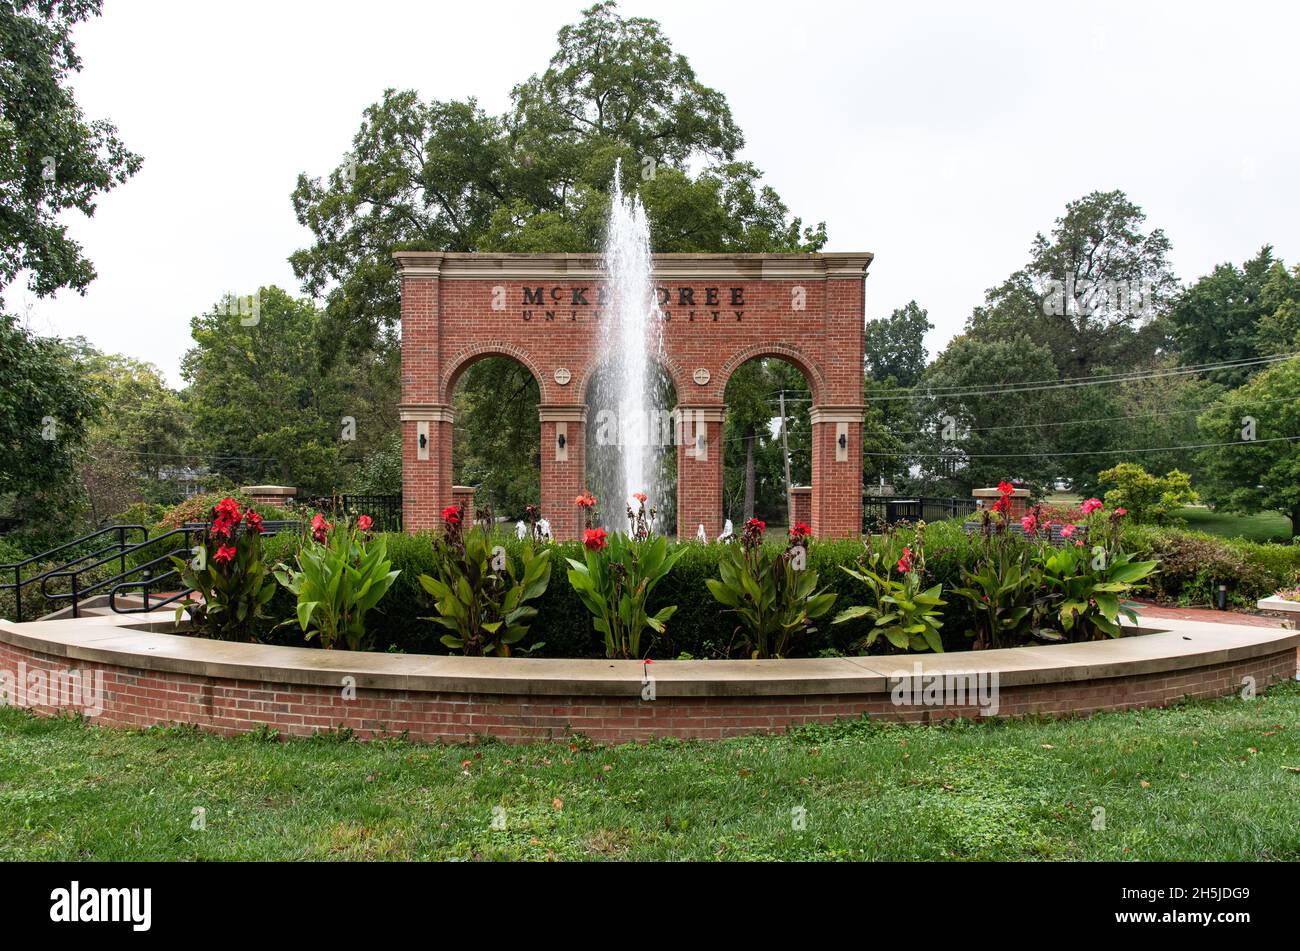 Entrance to McKendree University with brick entryway monument with three arches in circular patio, a fountain, greenery, Lebanon, Illinois, USA. Stock Photo